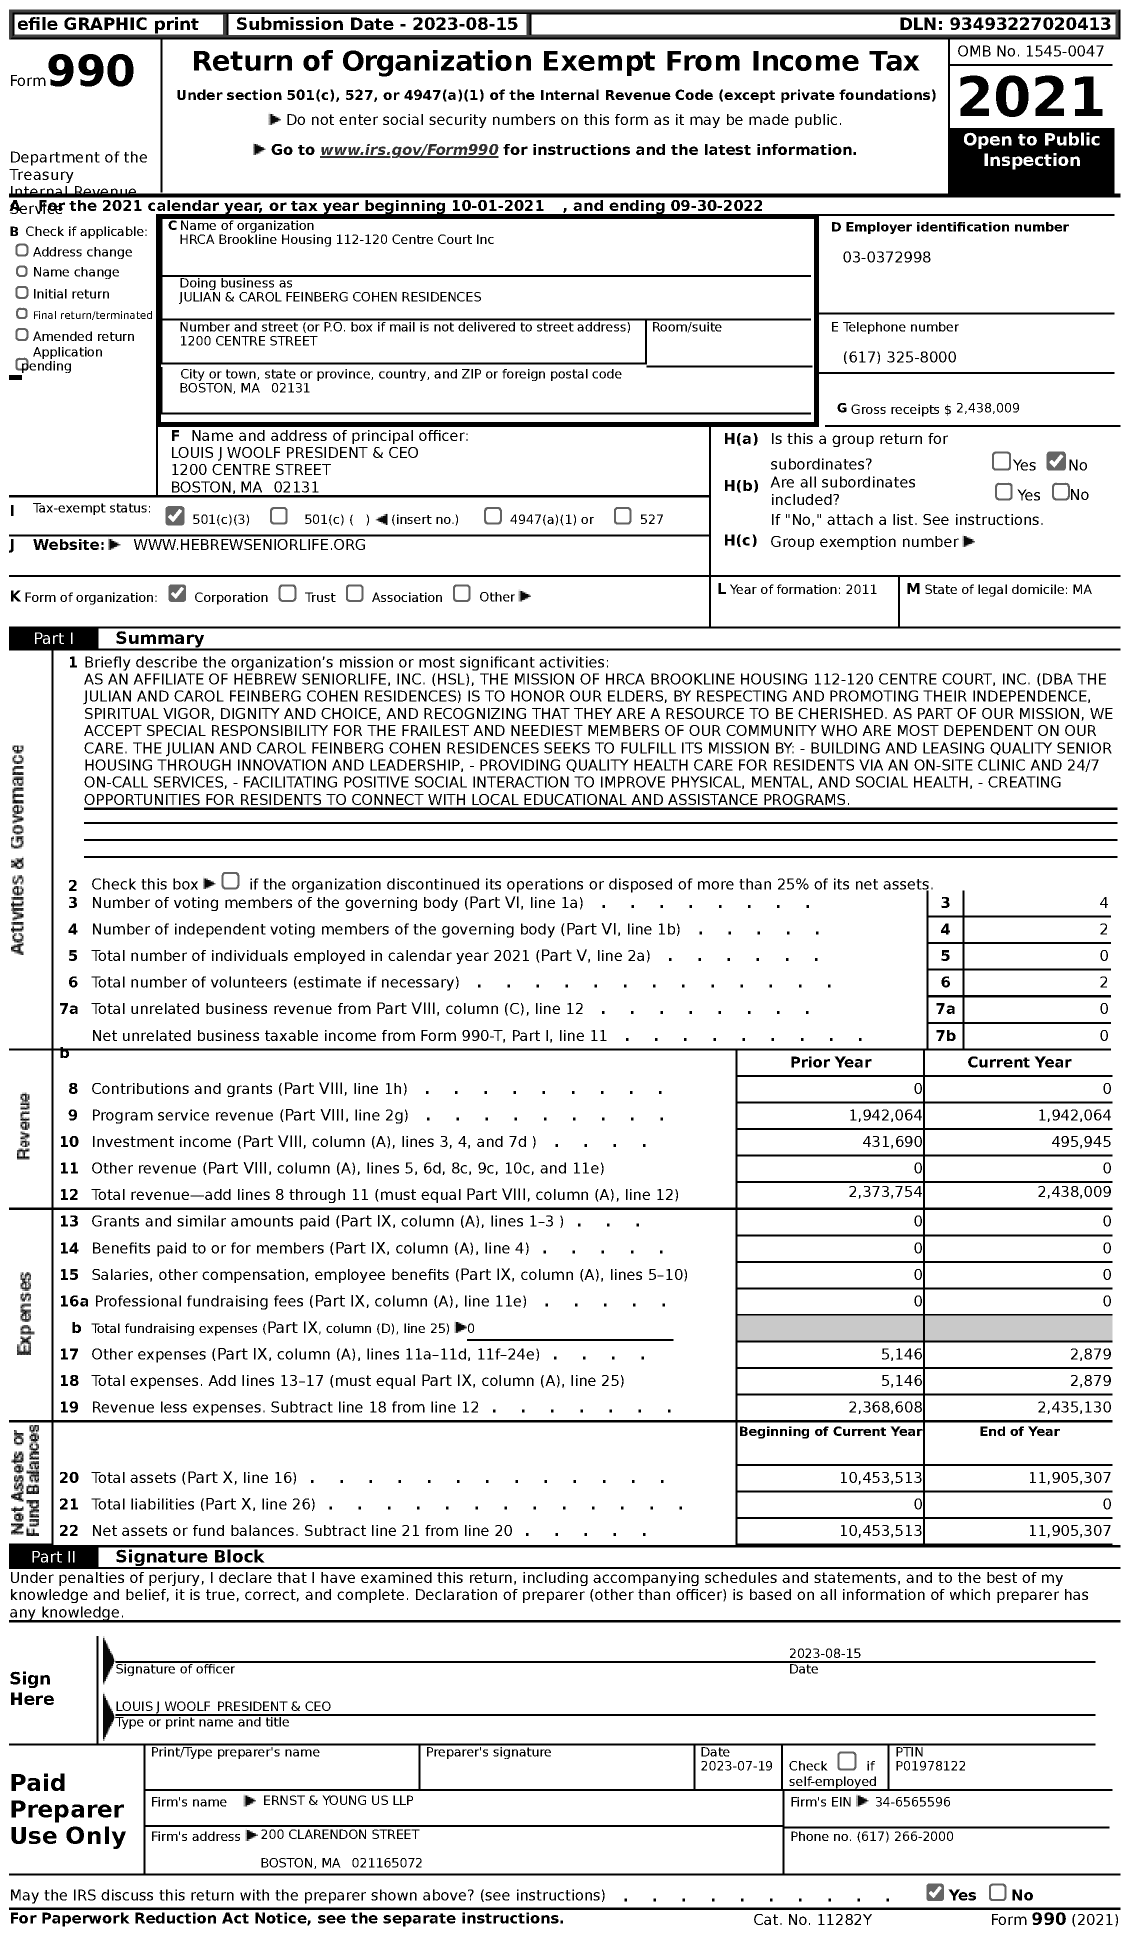 Image of first page of 2021 Form 990 for Julian and Carol Feinberg Cohen Residences